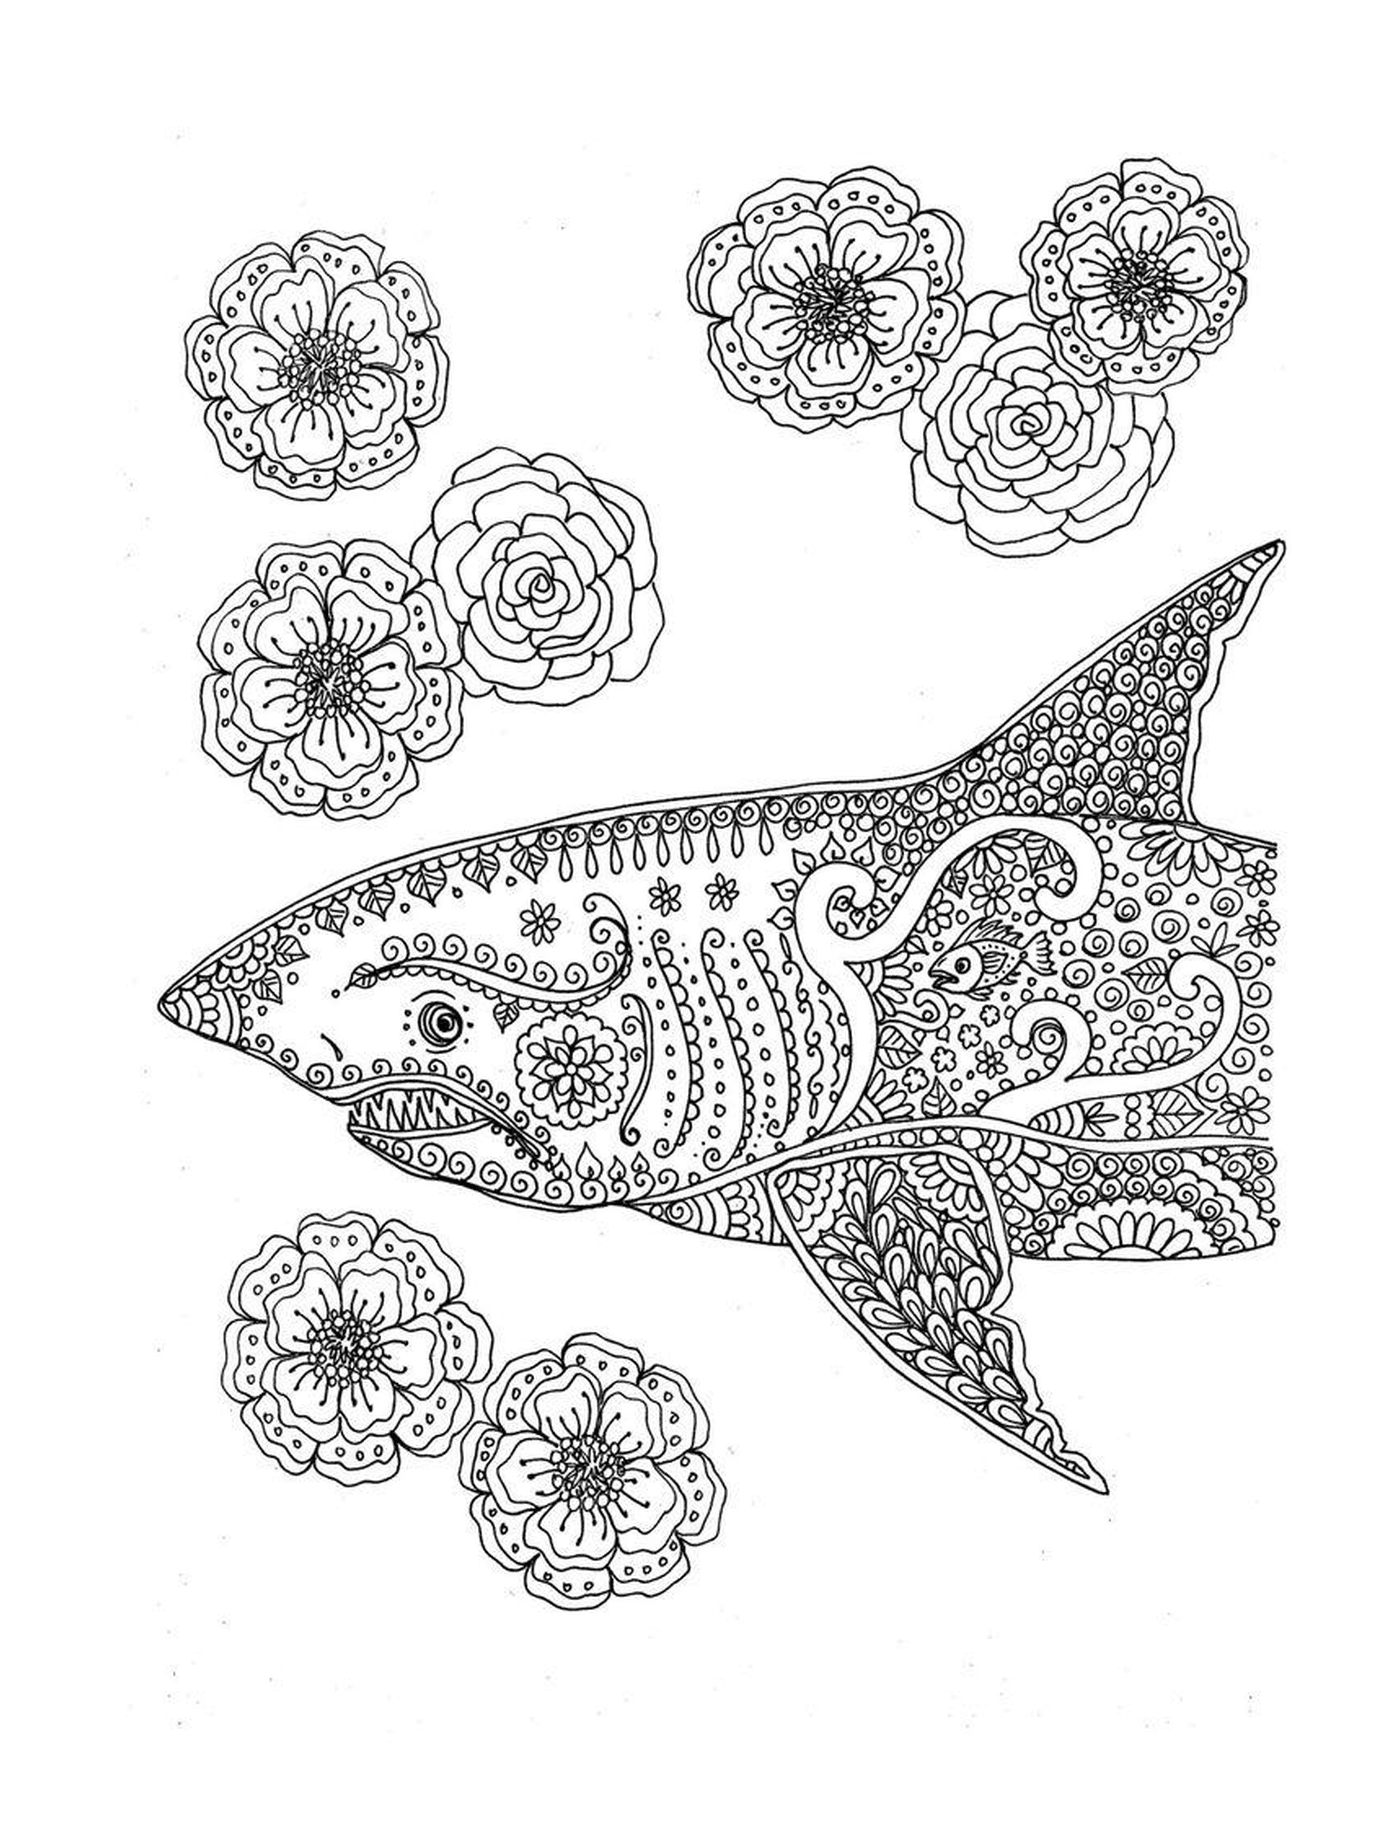  Shark decorated with floral motifs 